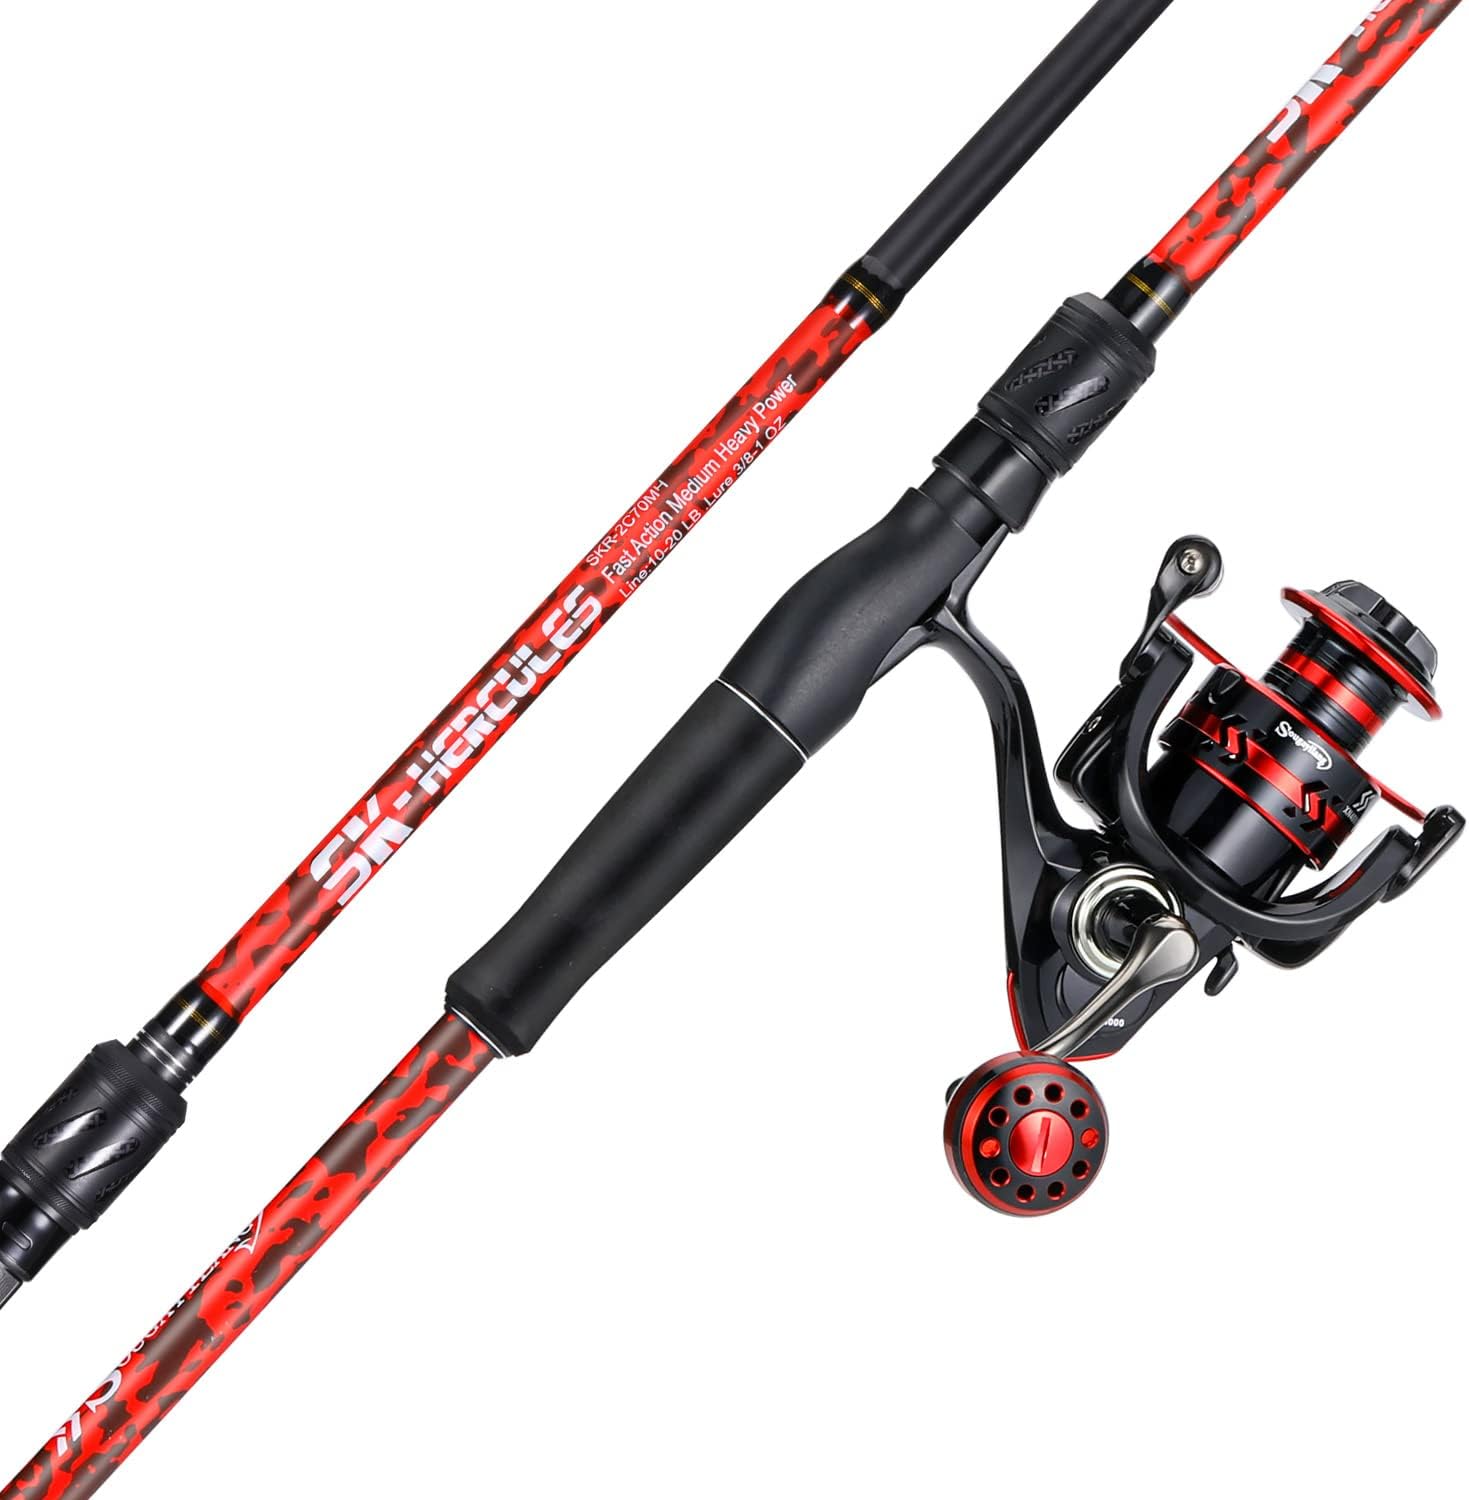 Sougayilang 7’ Fishing Rod and Reel Spinning Combo, 2 Piece Fishing Rod, Size 4000 Reel, Right/Left Handle Position, Suitable for Inshore Fishing